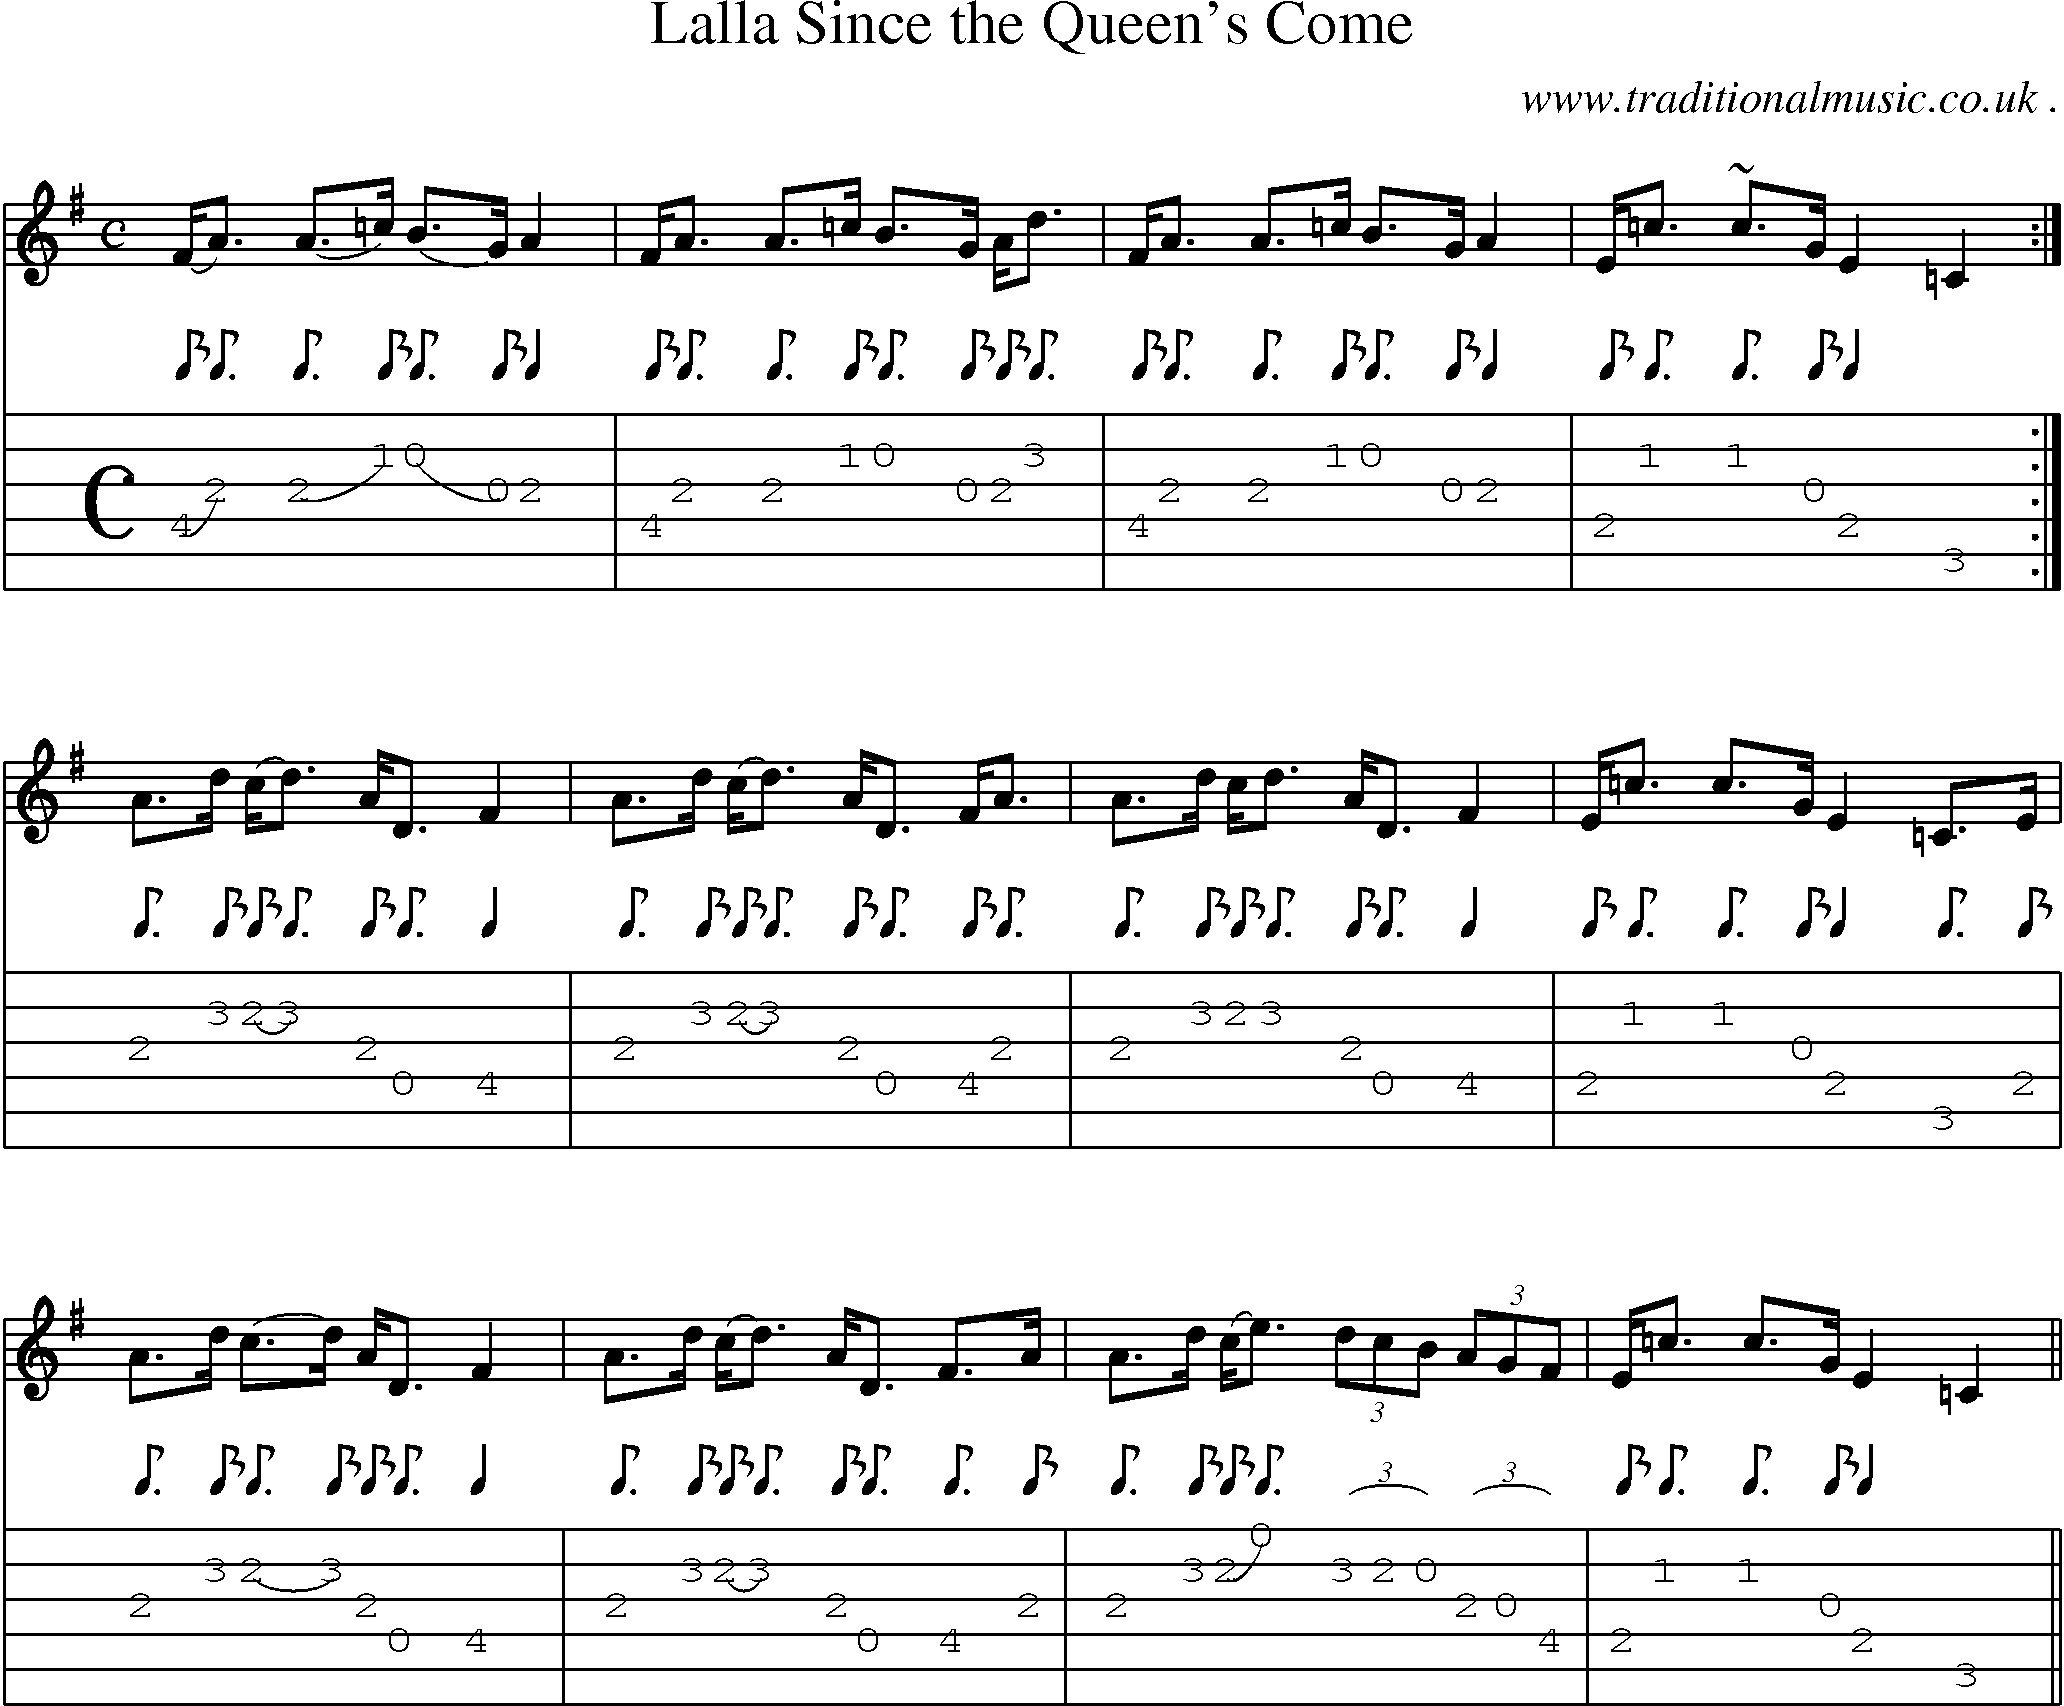 Sheet-music  score, Chords and Guitar Tabs for Lalla Since The Queens Come